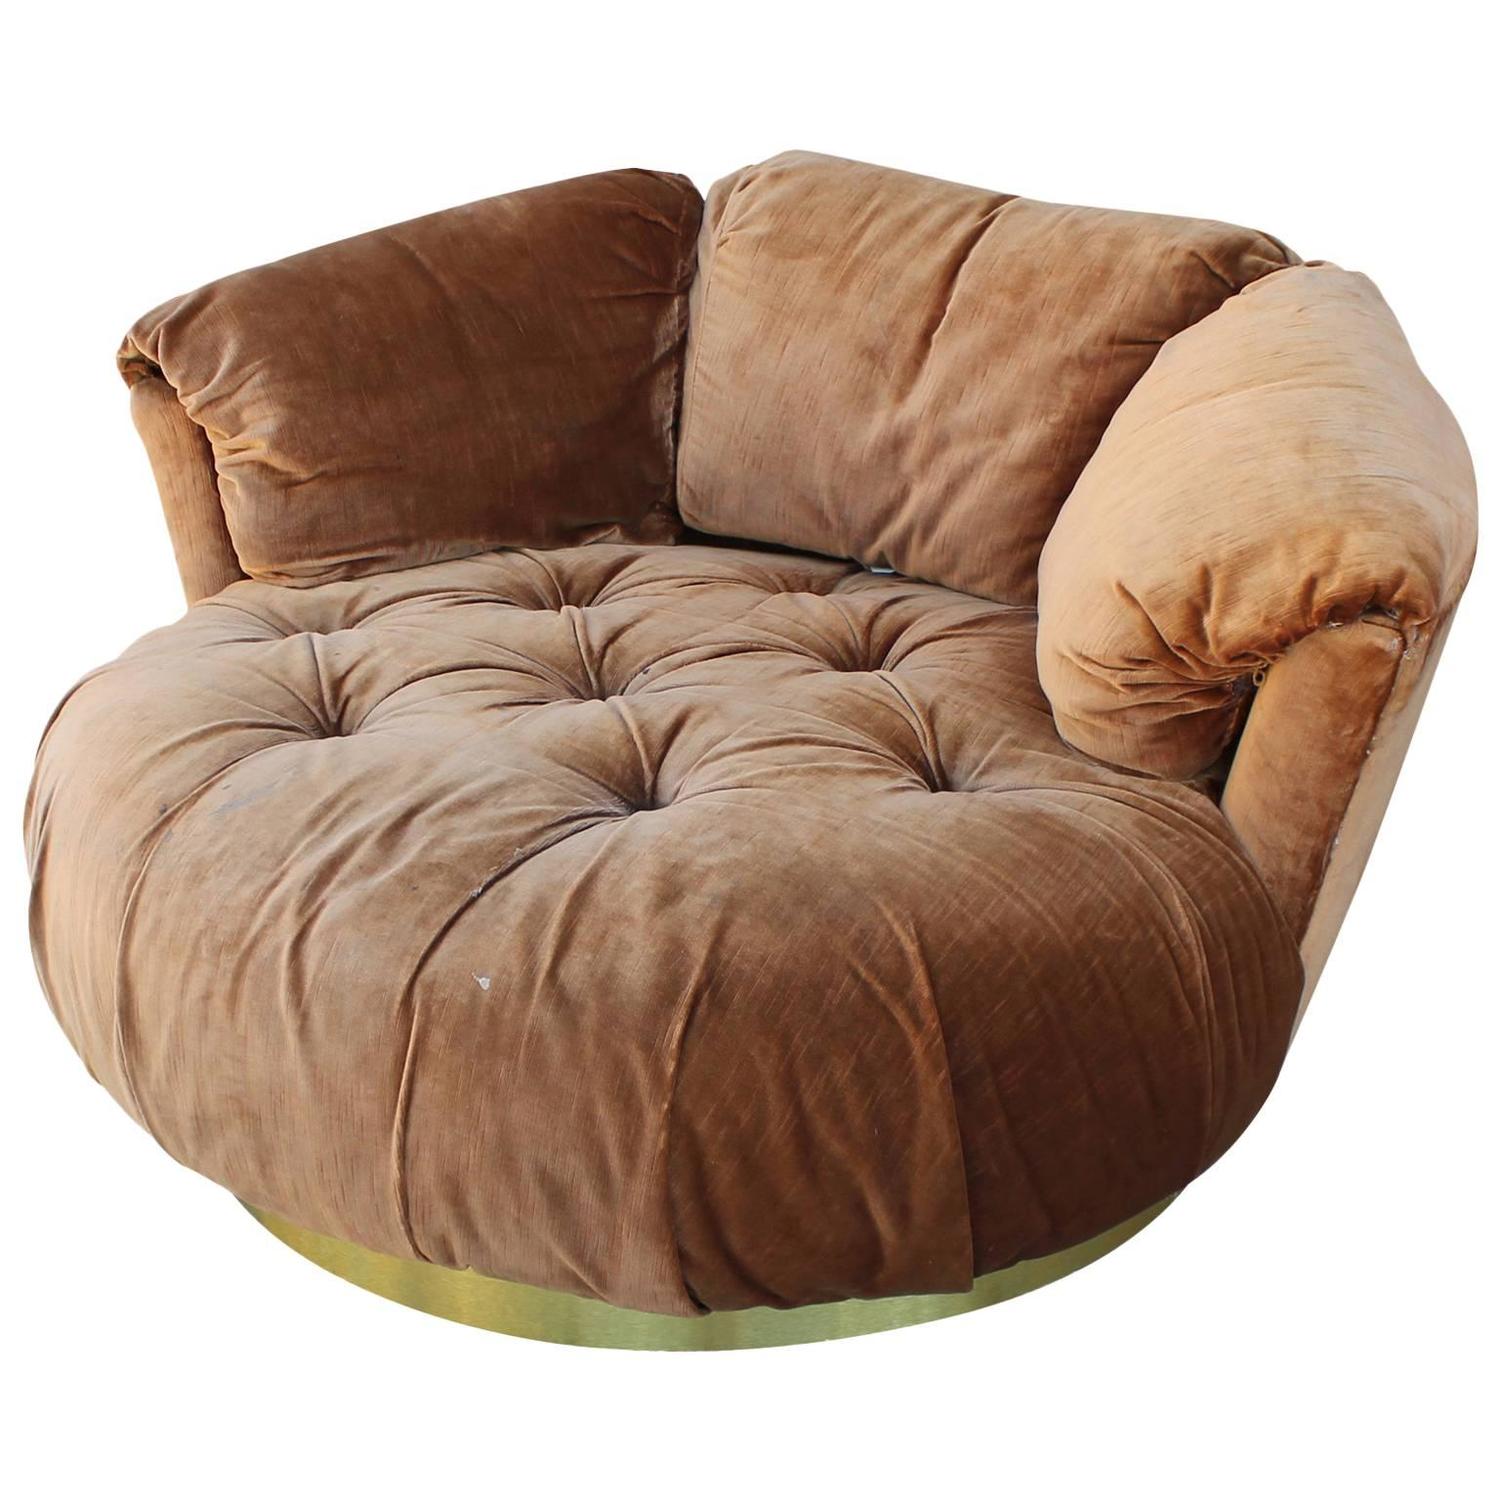 Plush Tufted Circle Lounge Chair with Brass Base at 1stdibs